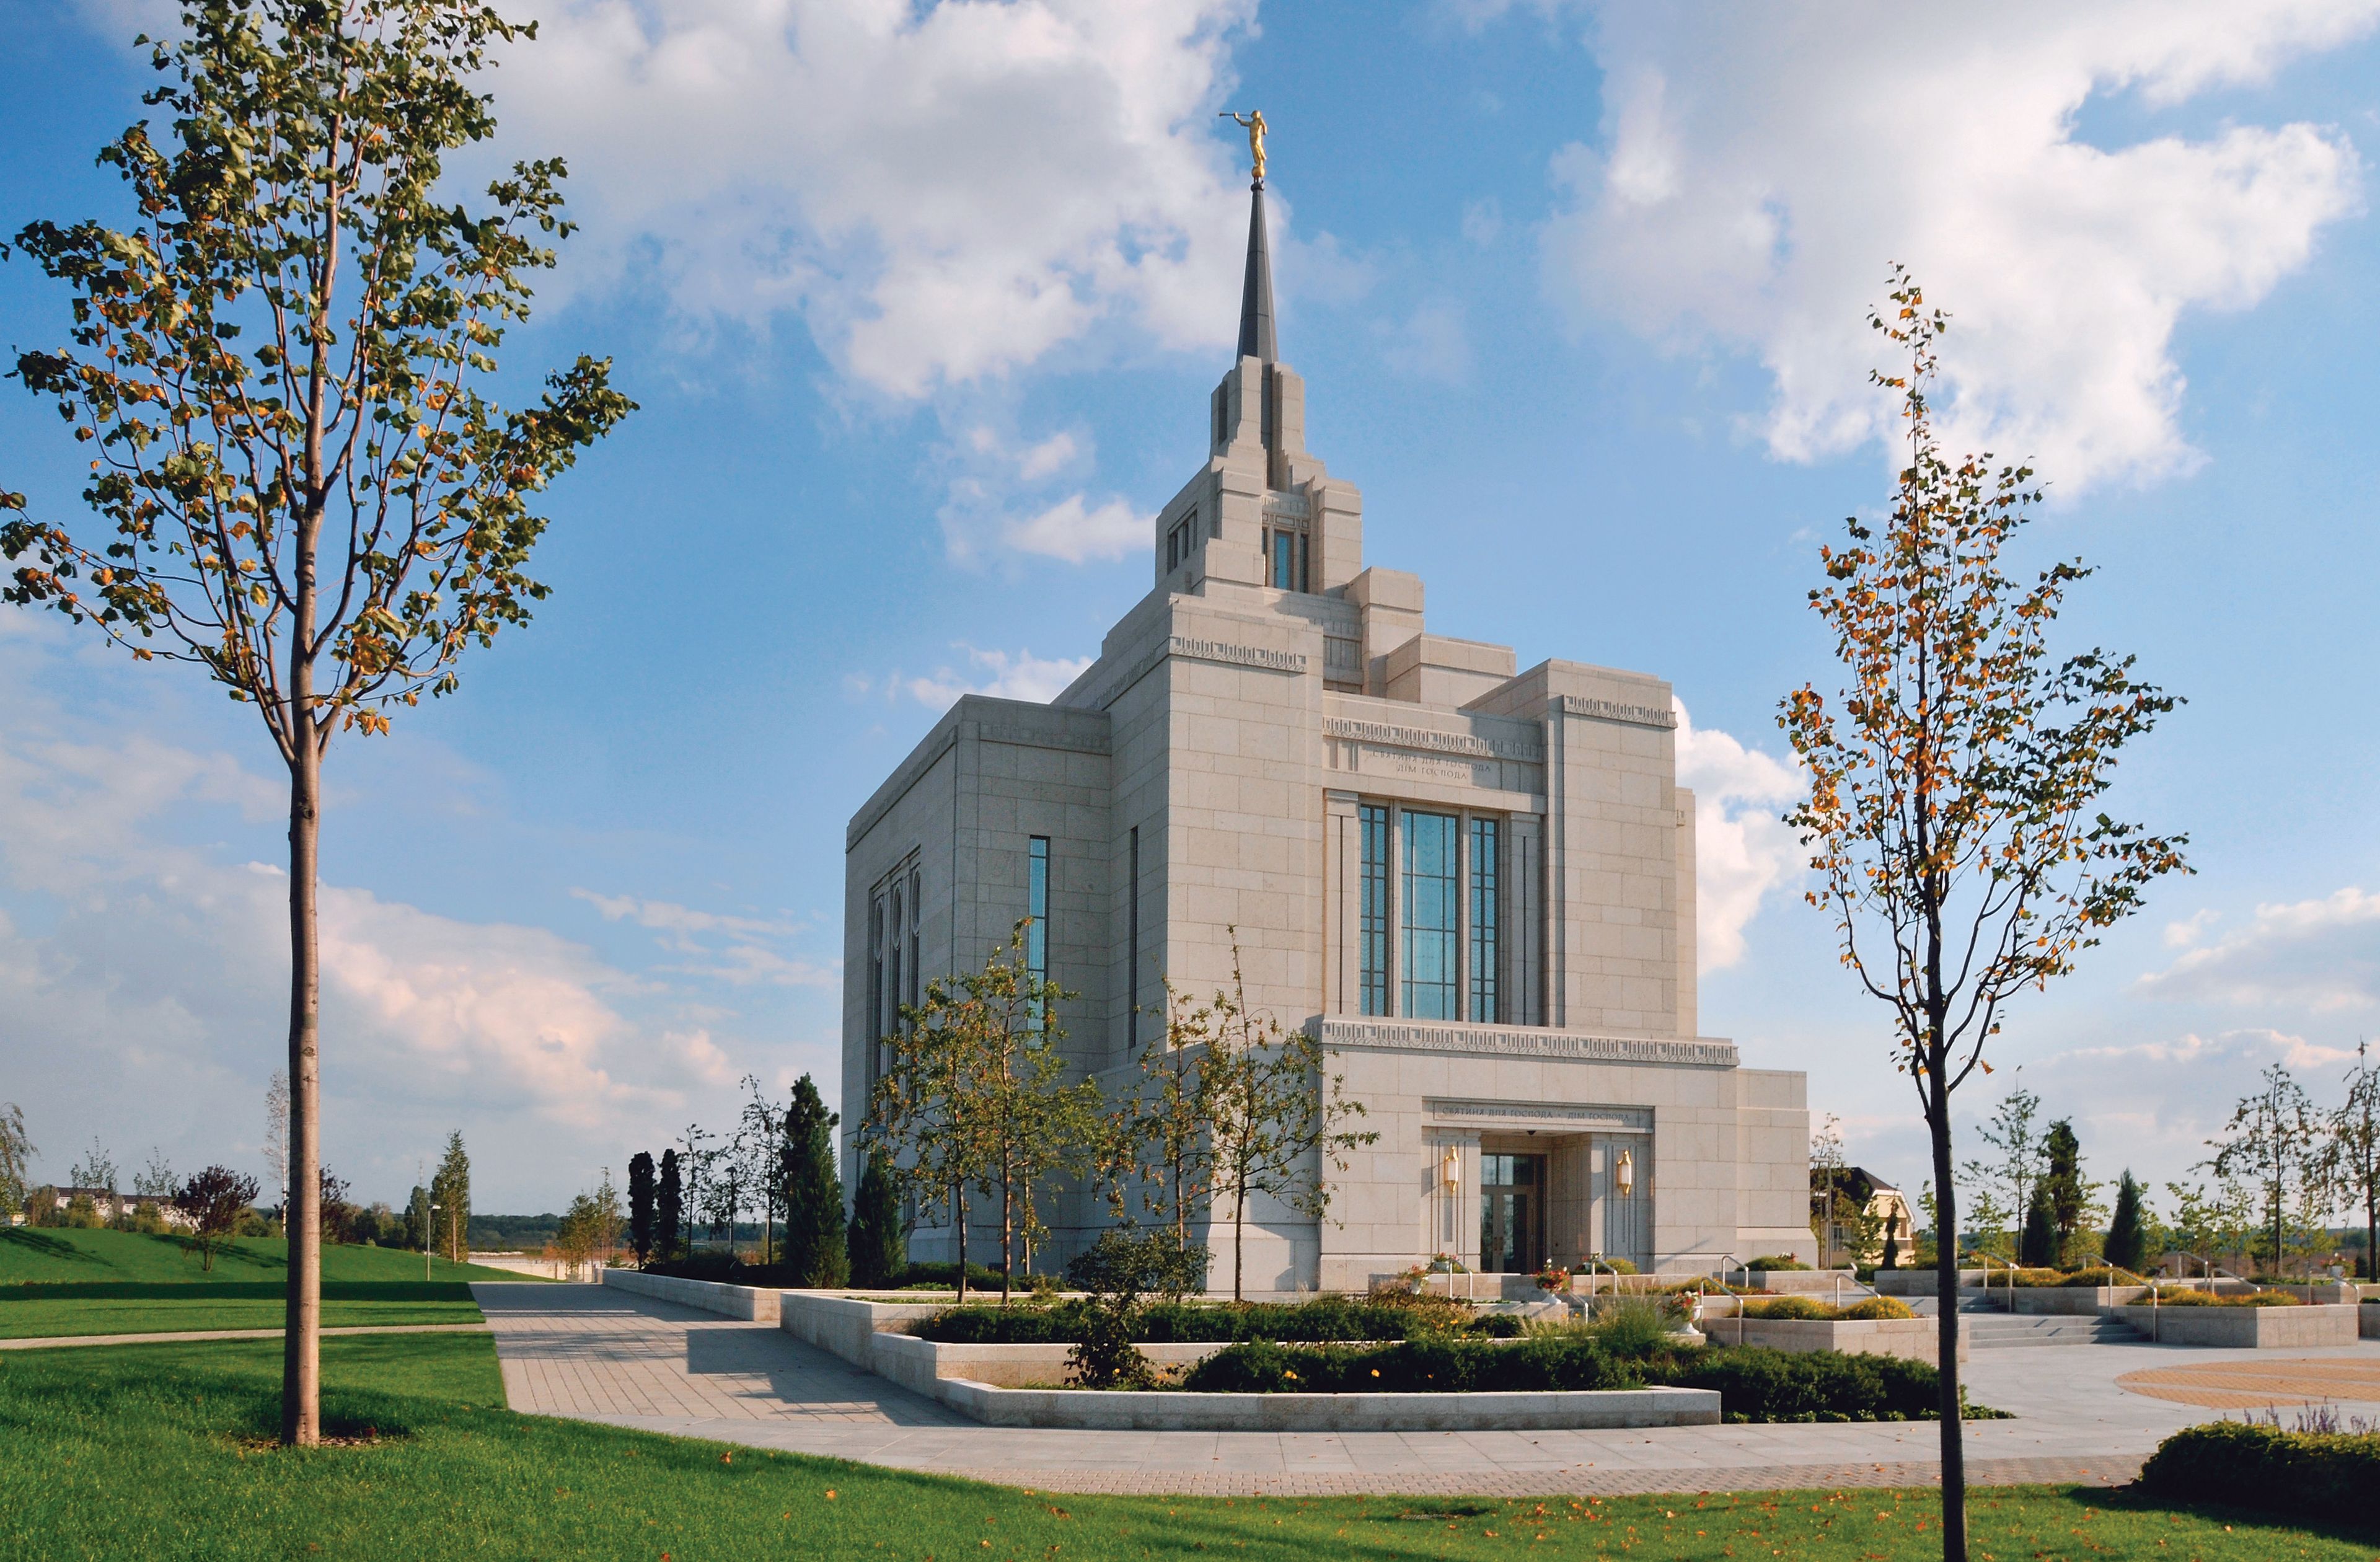 The entire Kyiv Ukraine Temple, including the entrance and landscaping.